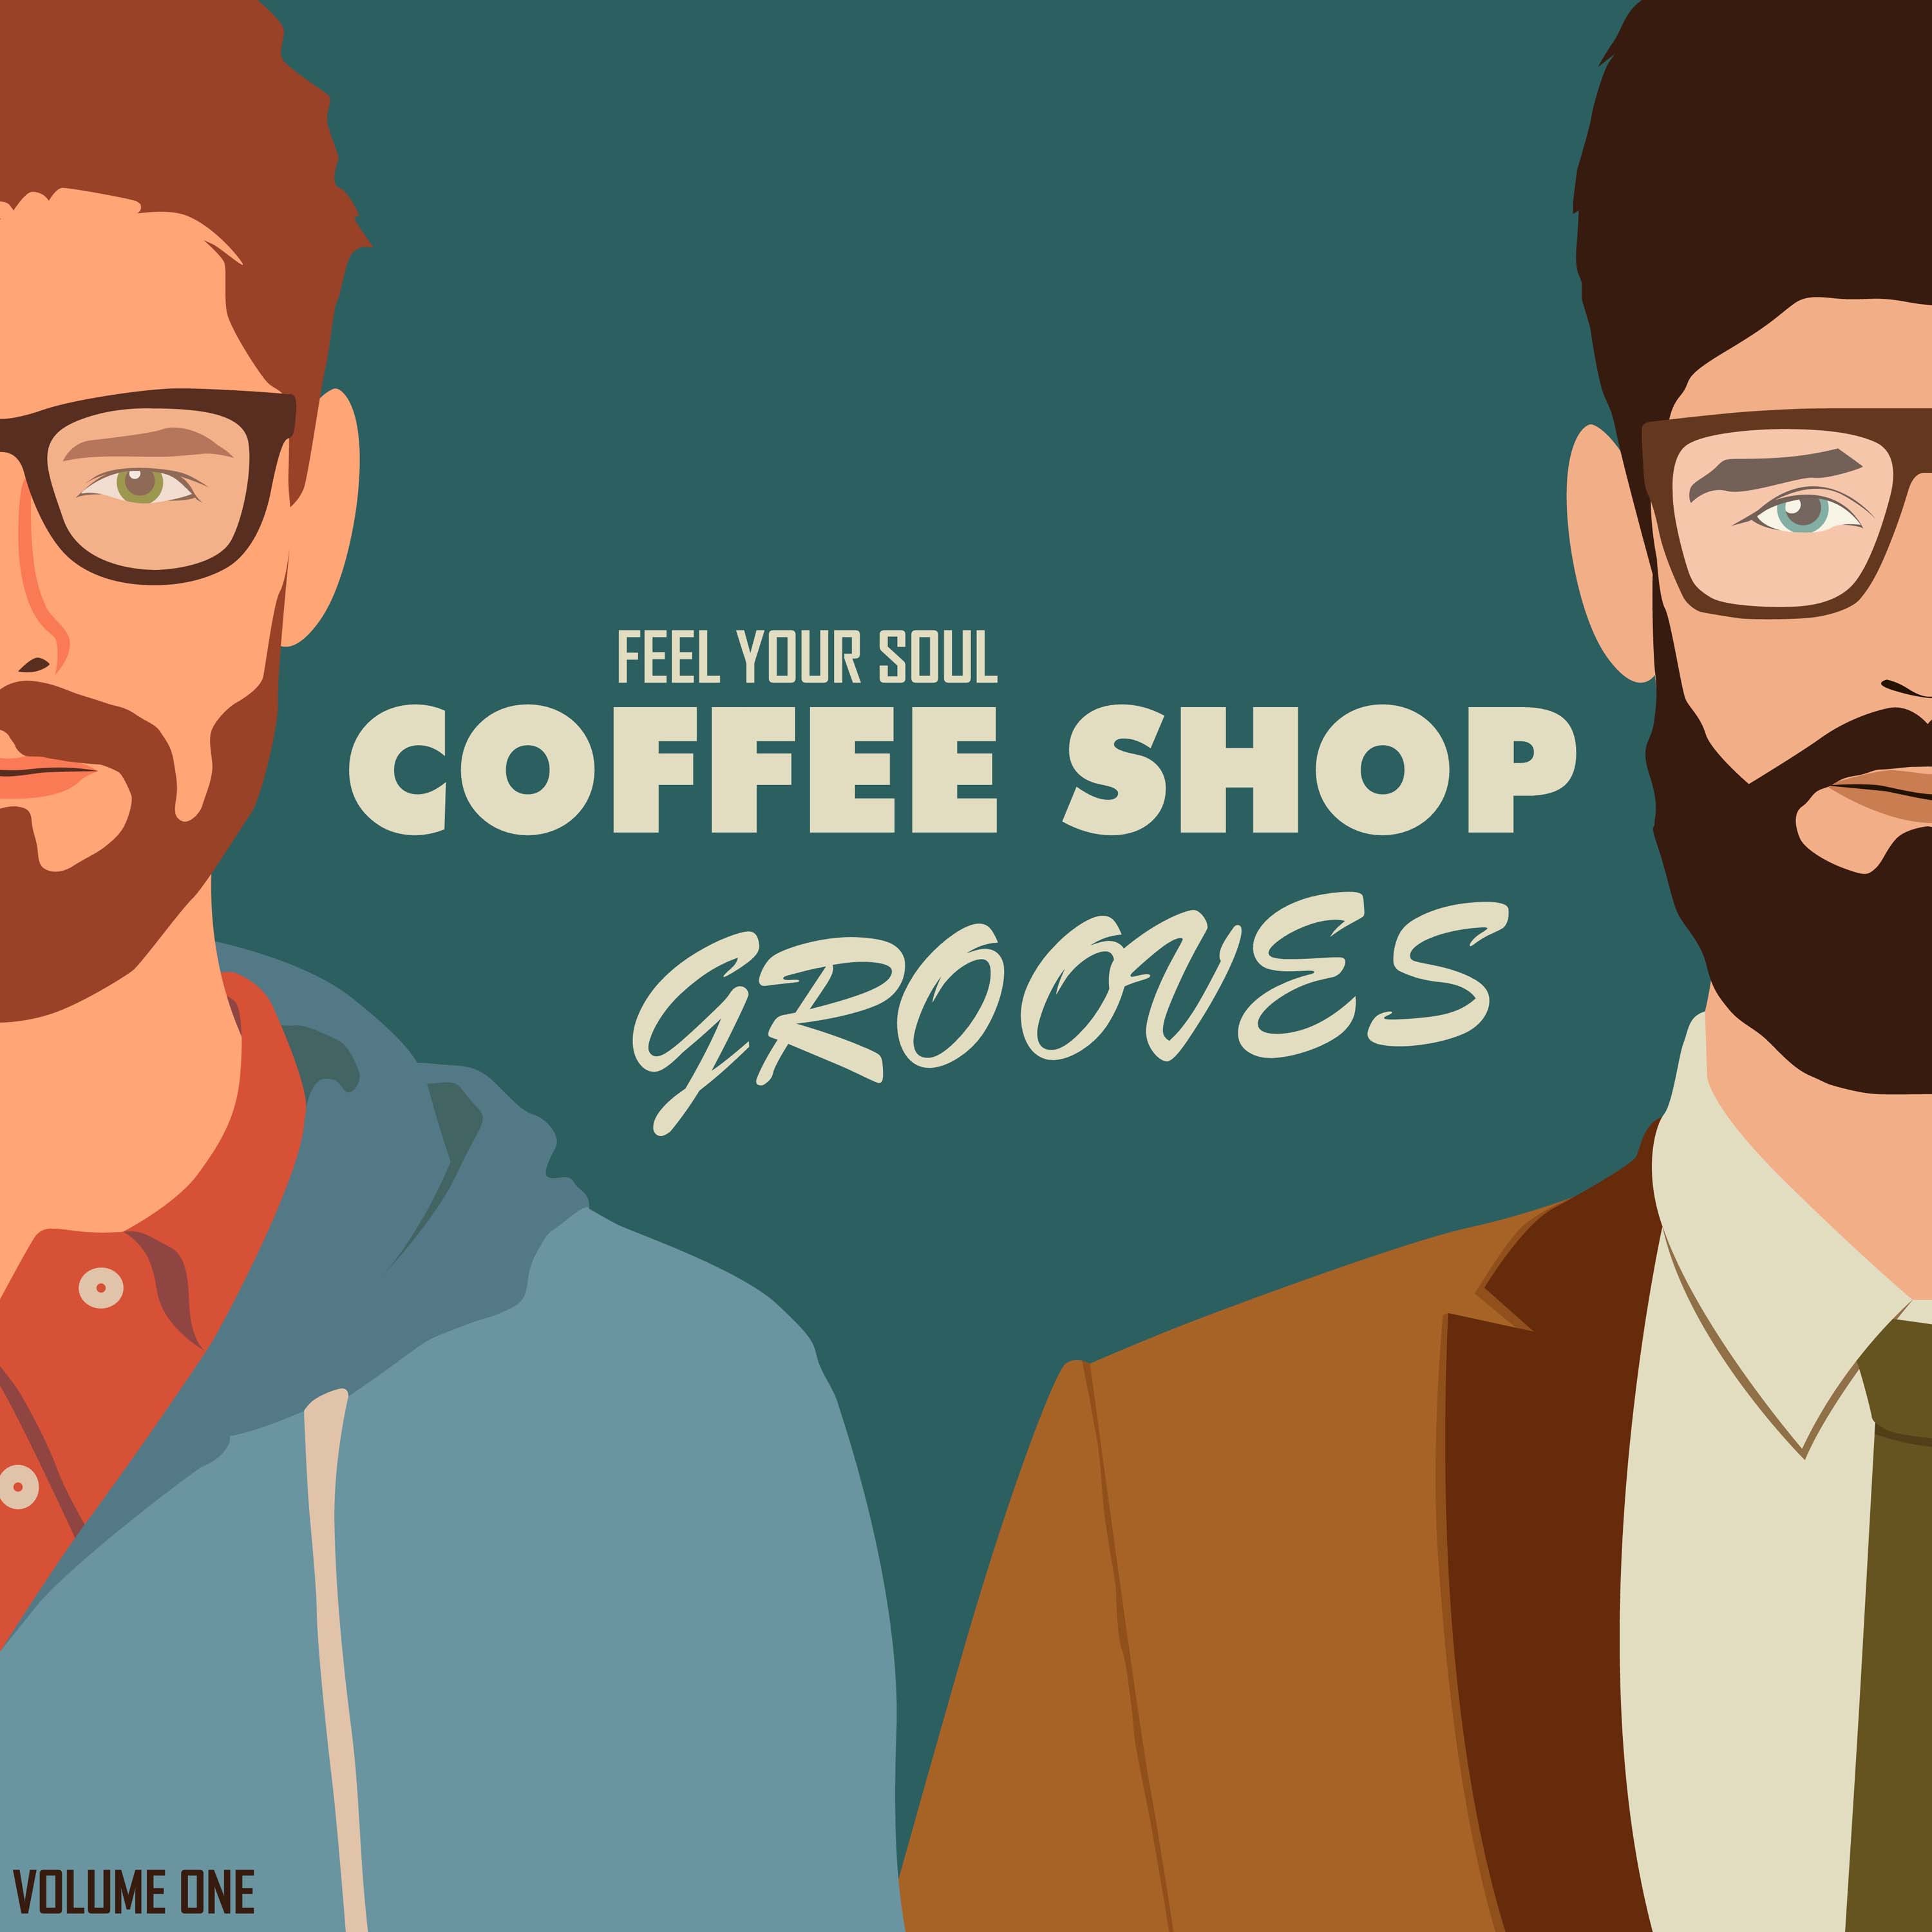 Coffee Shop Grooves 1: Feel Your Soul